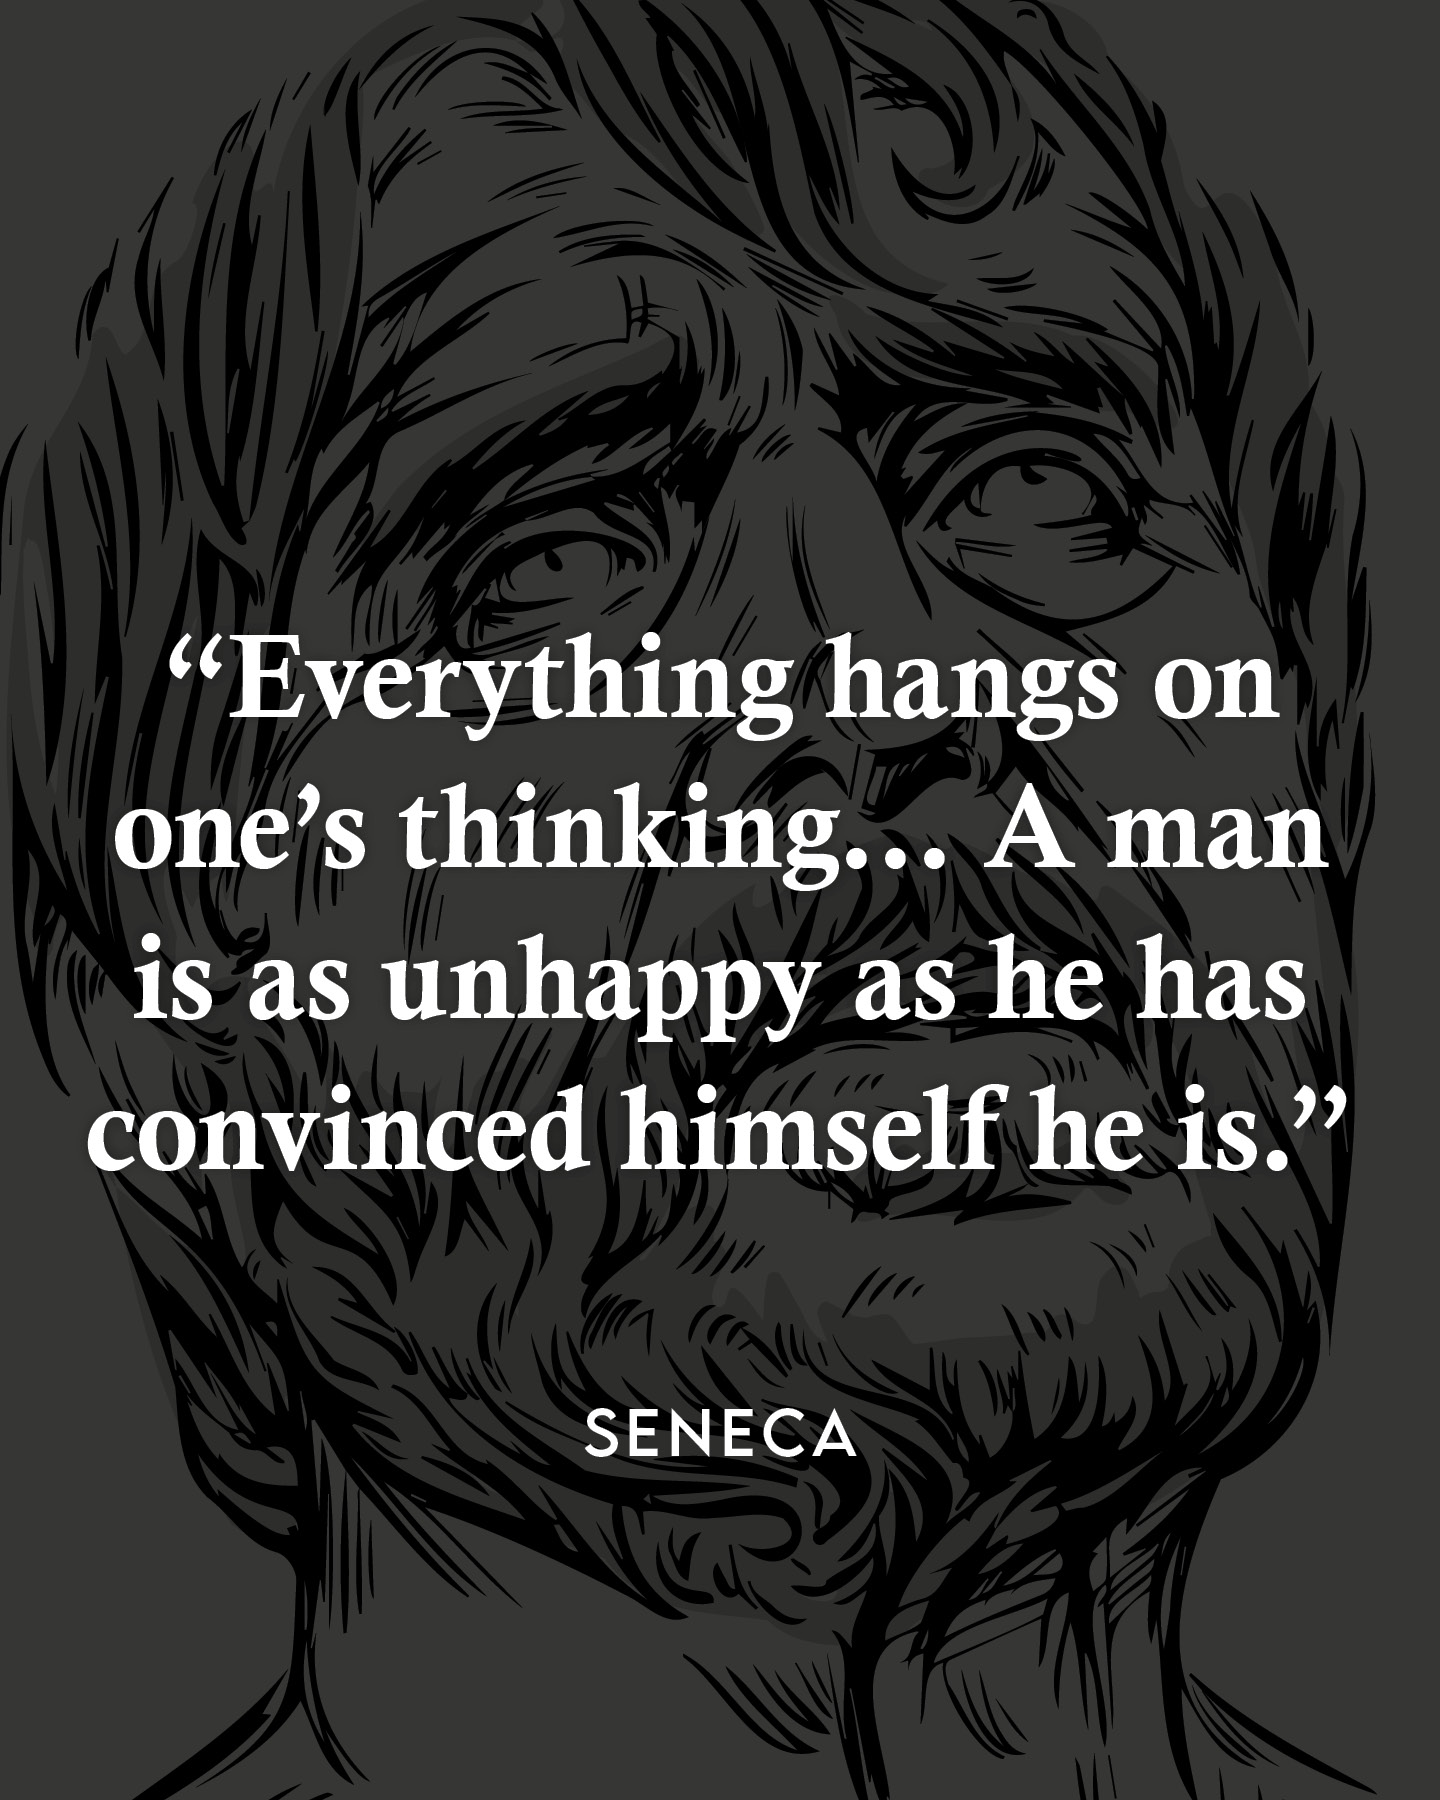 Everything hangs on one’s thinking. A man is as unhappy as he has convinced himself that he is. – Seneca